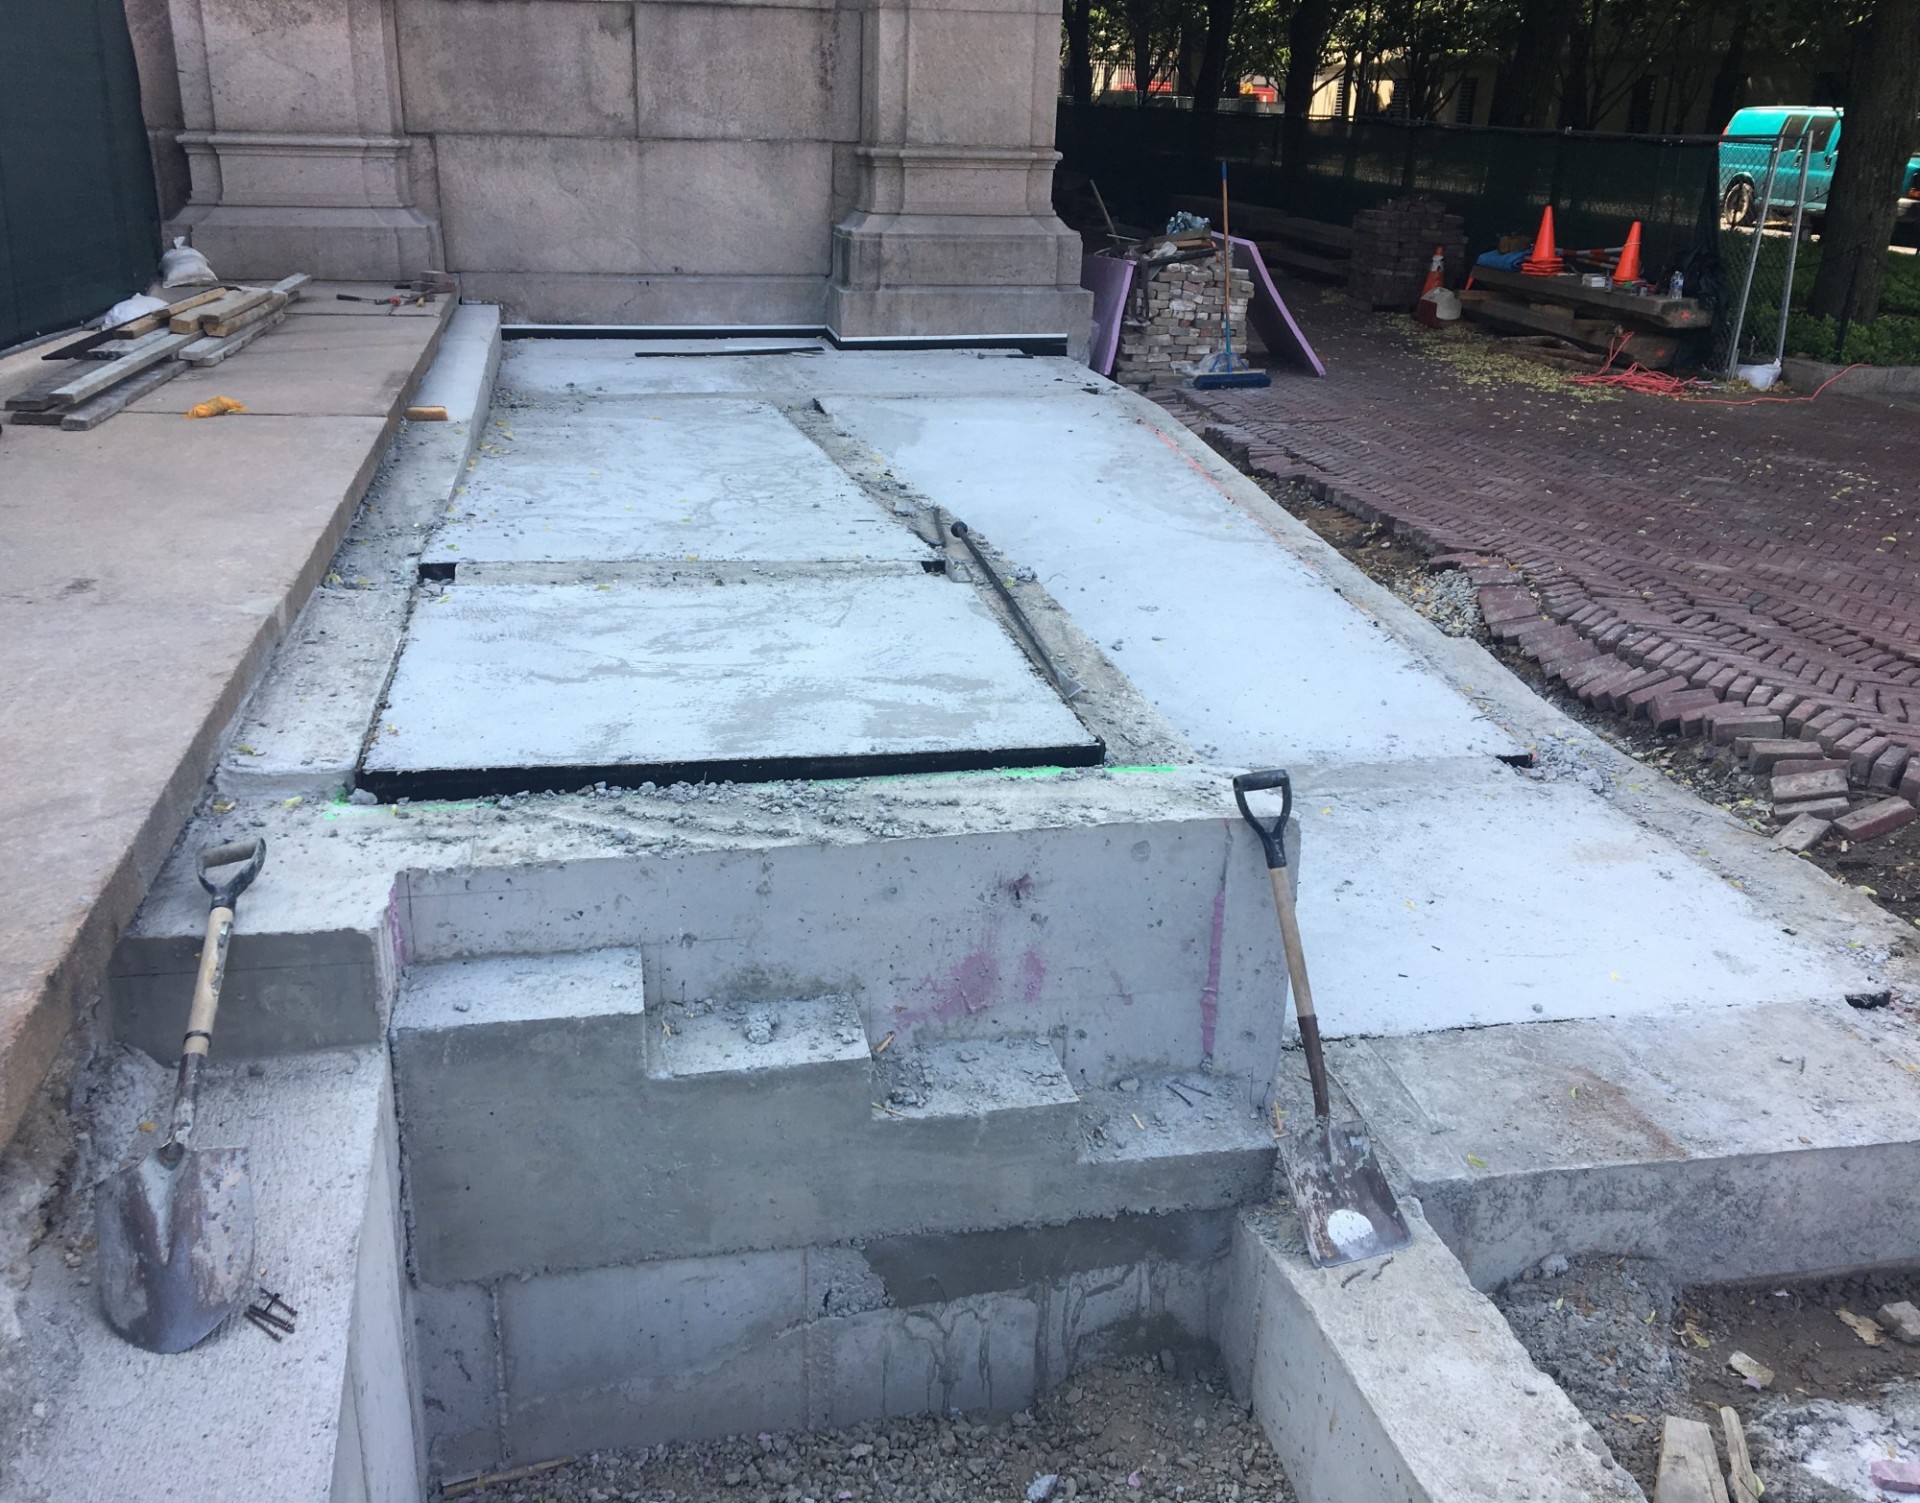 Construction continues on the new, accessible ramp between College Walk and Low Plaza